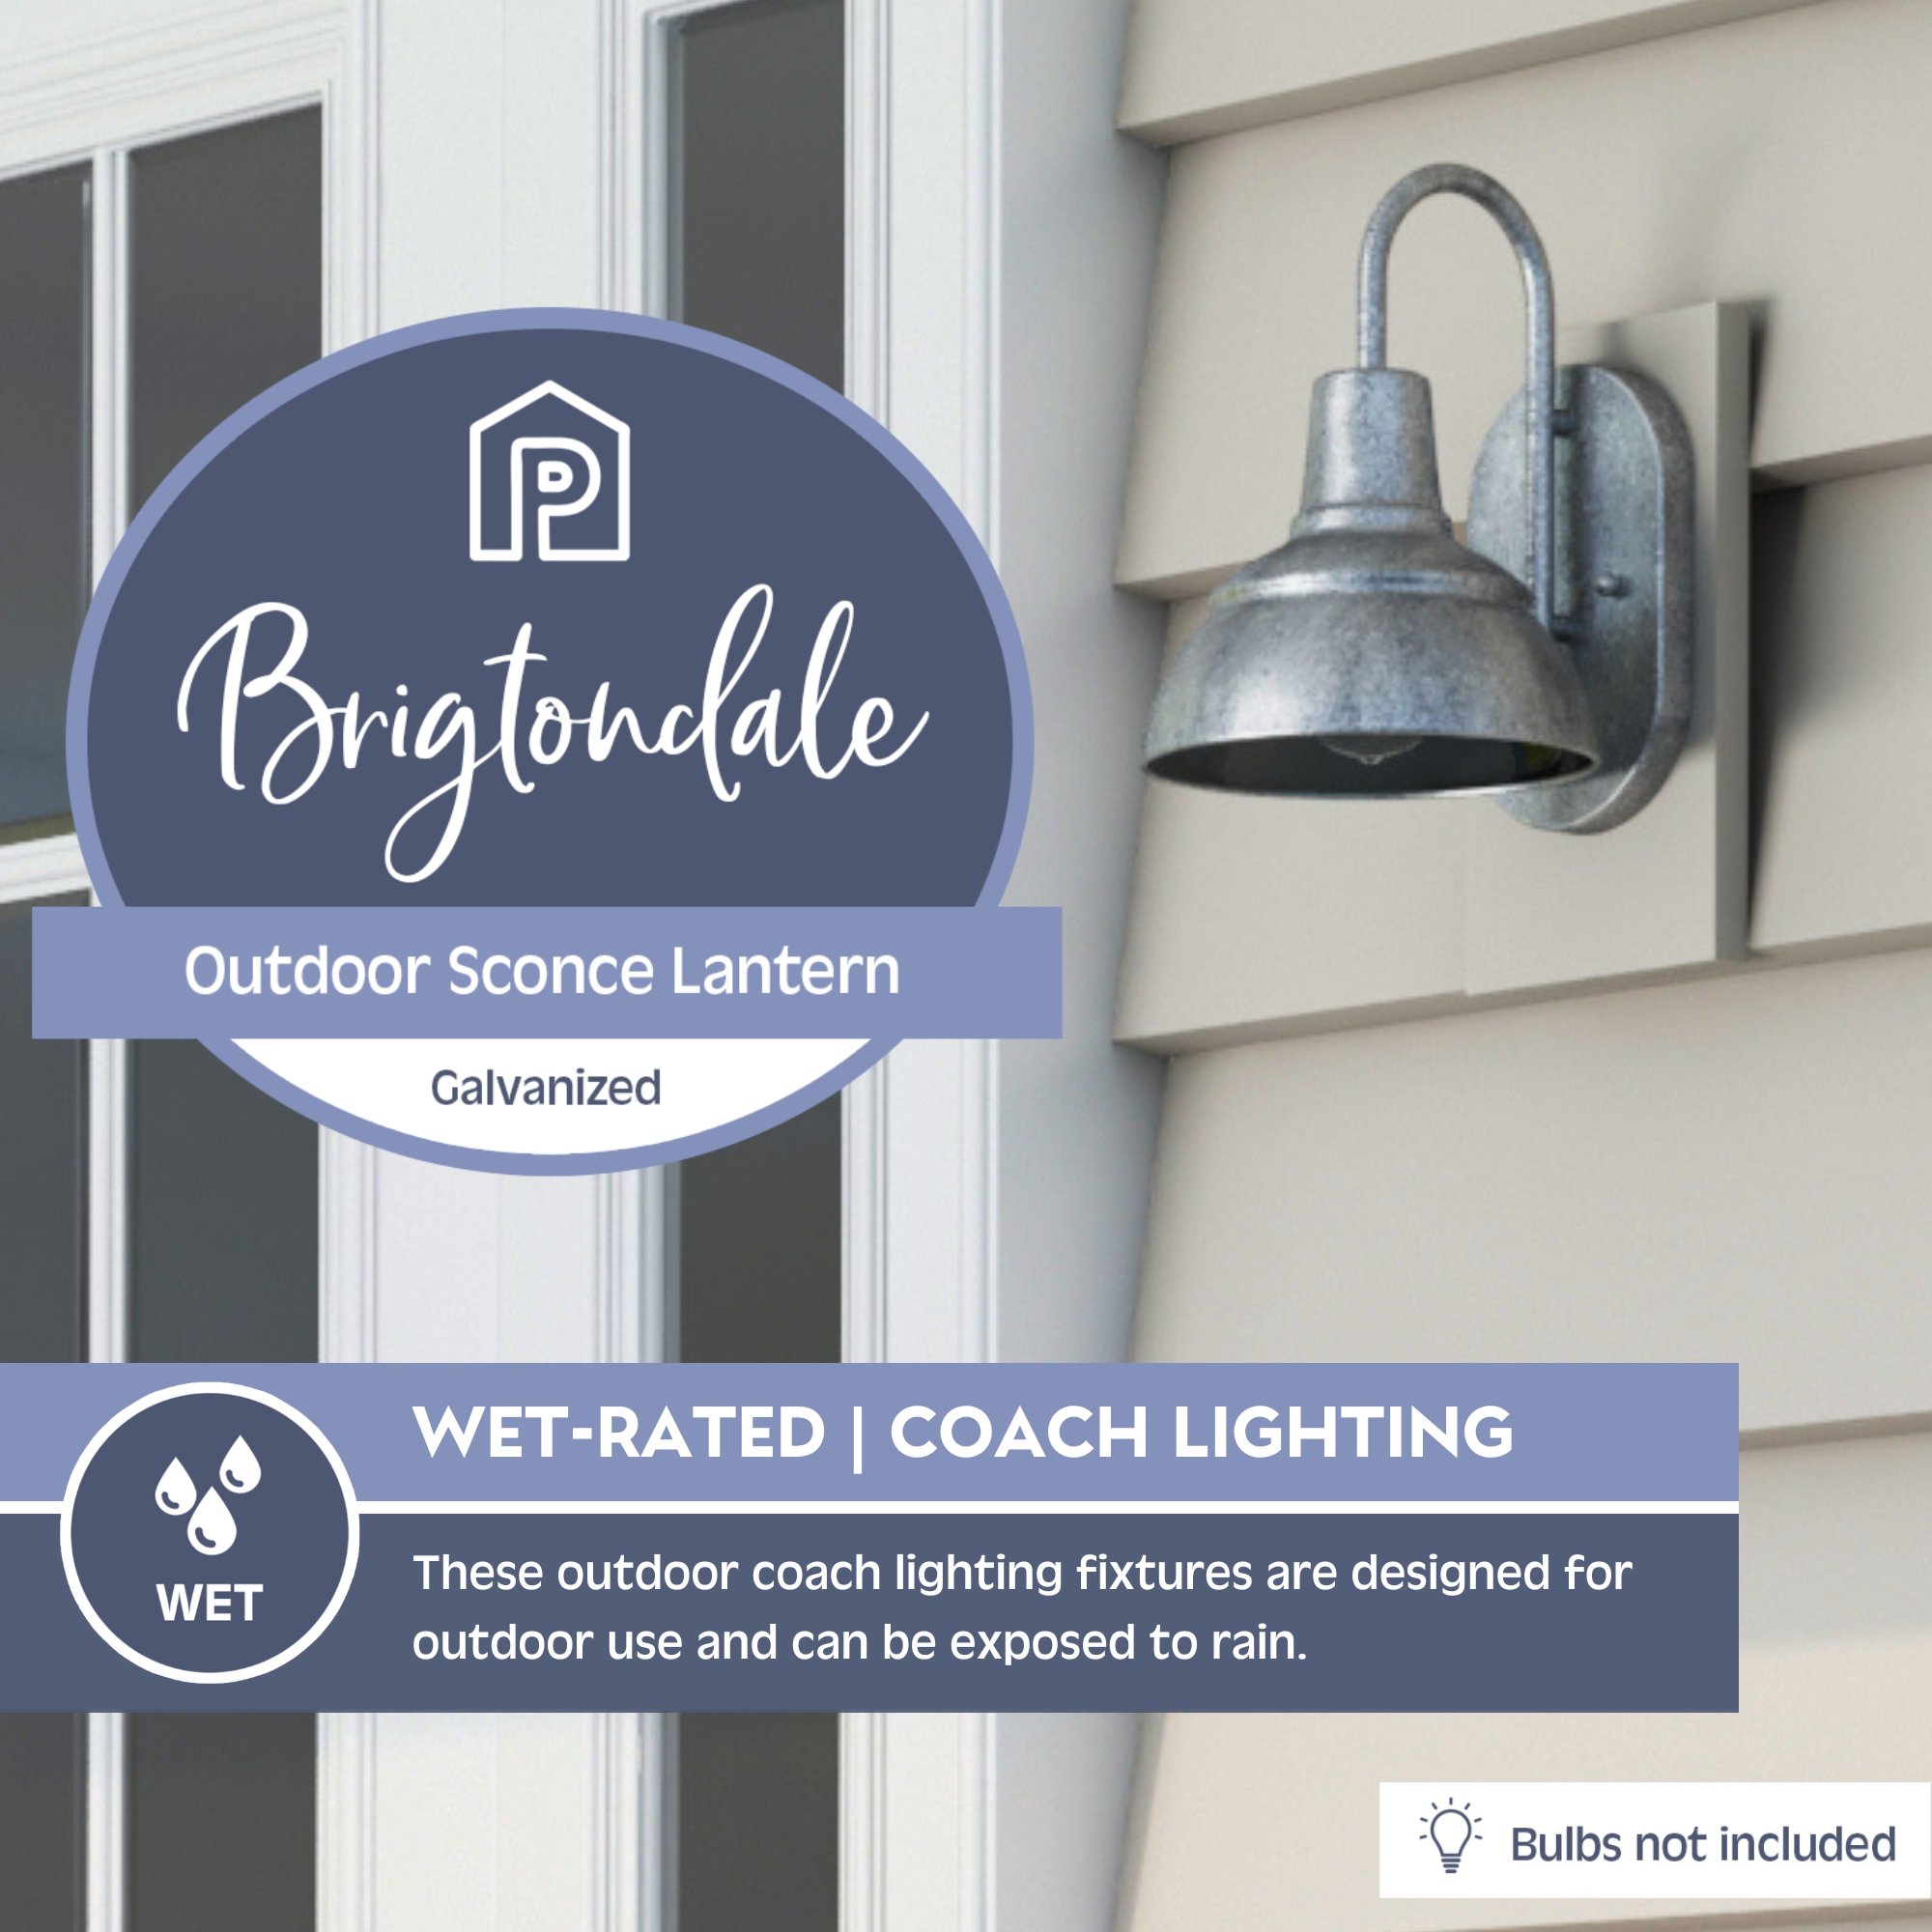 Brightondale, Wet-Rated Coach Light, Galvanized by Prominence Home